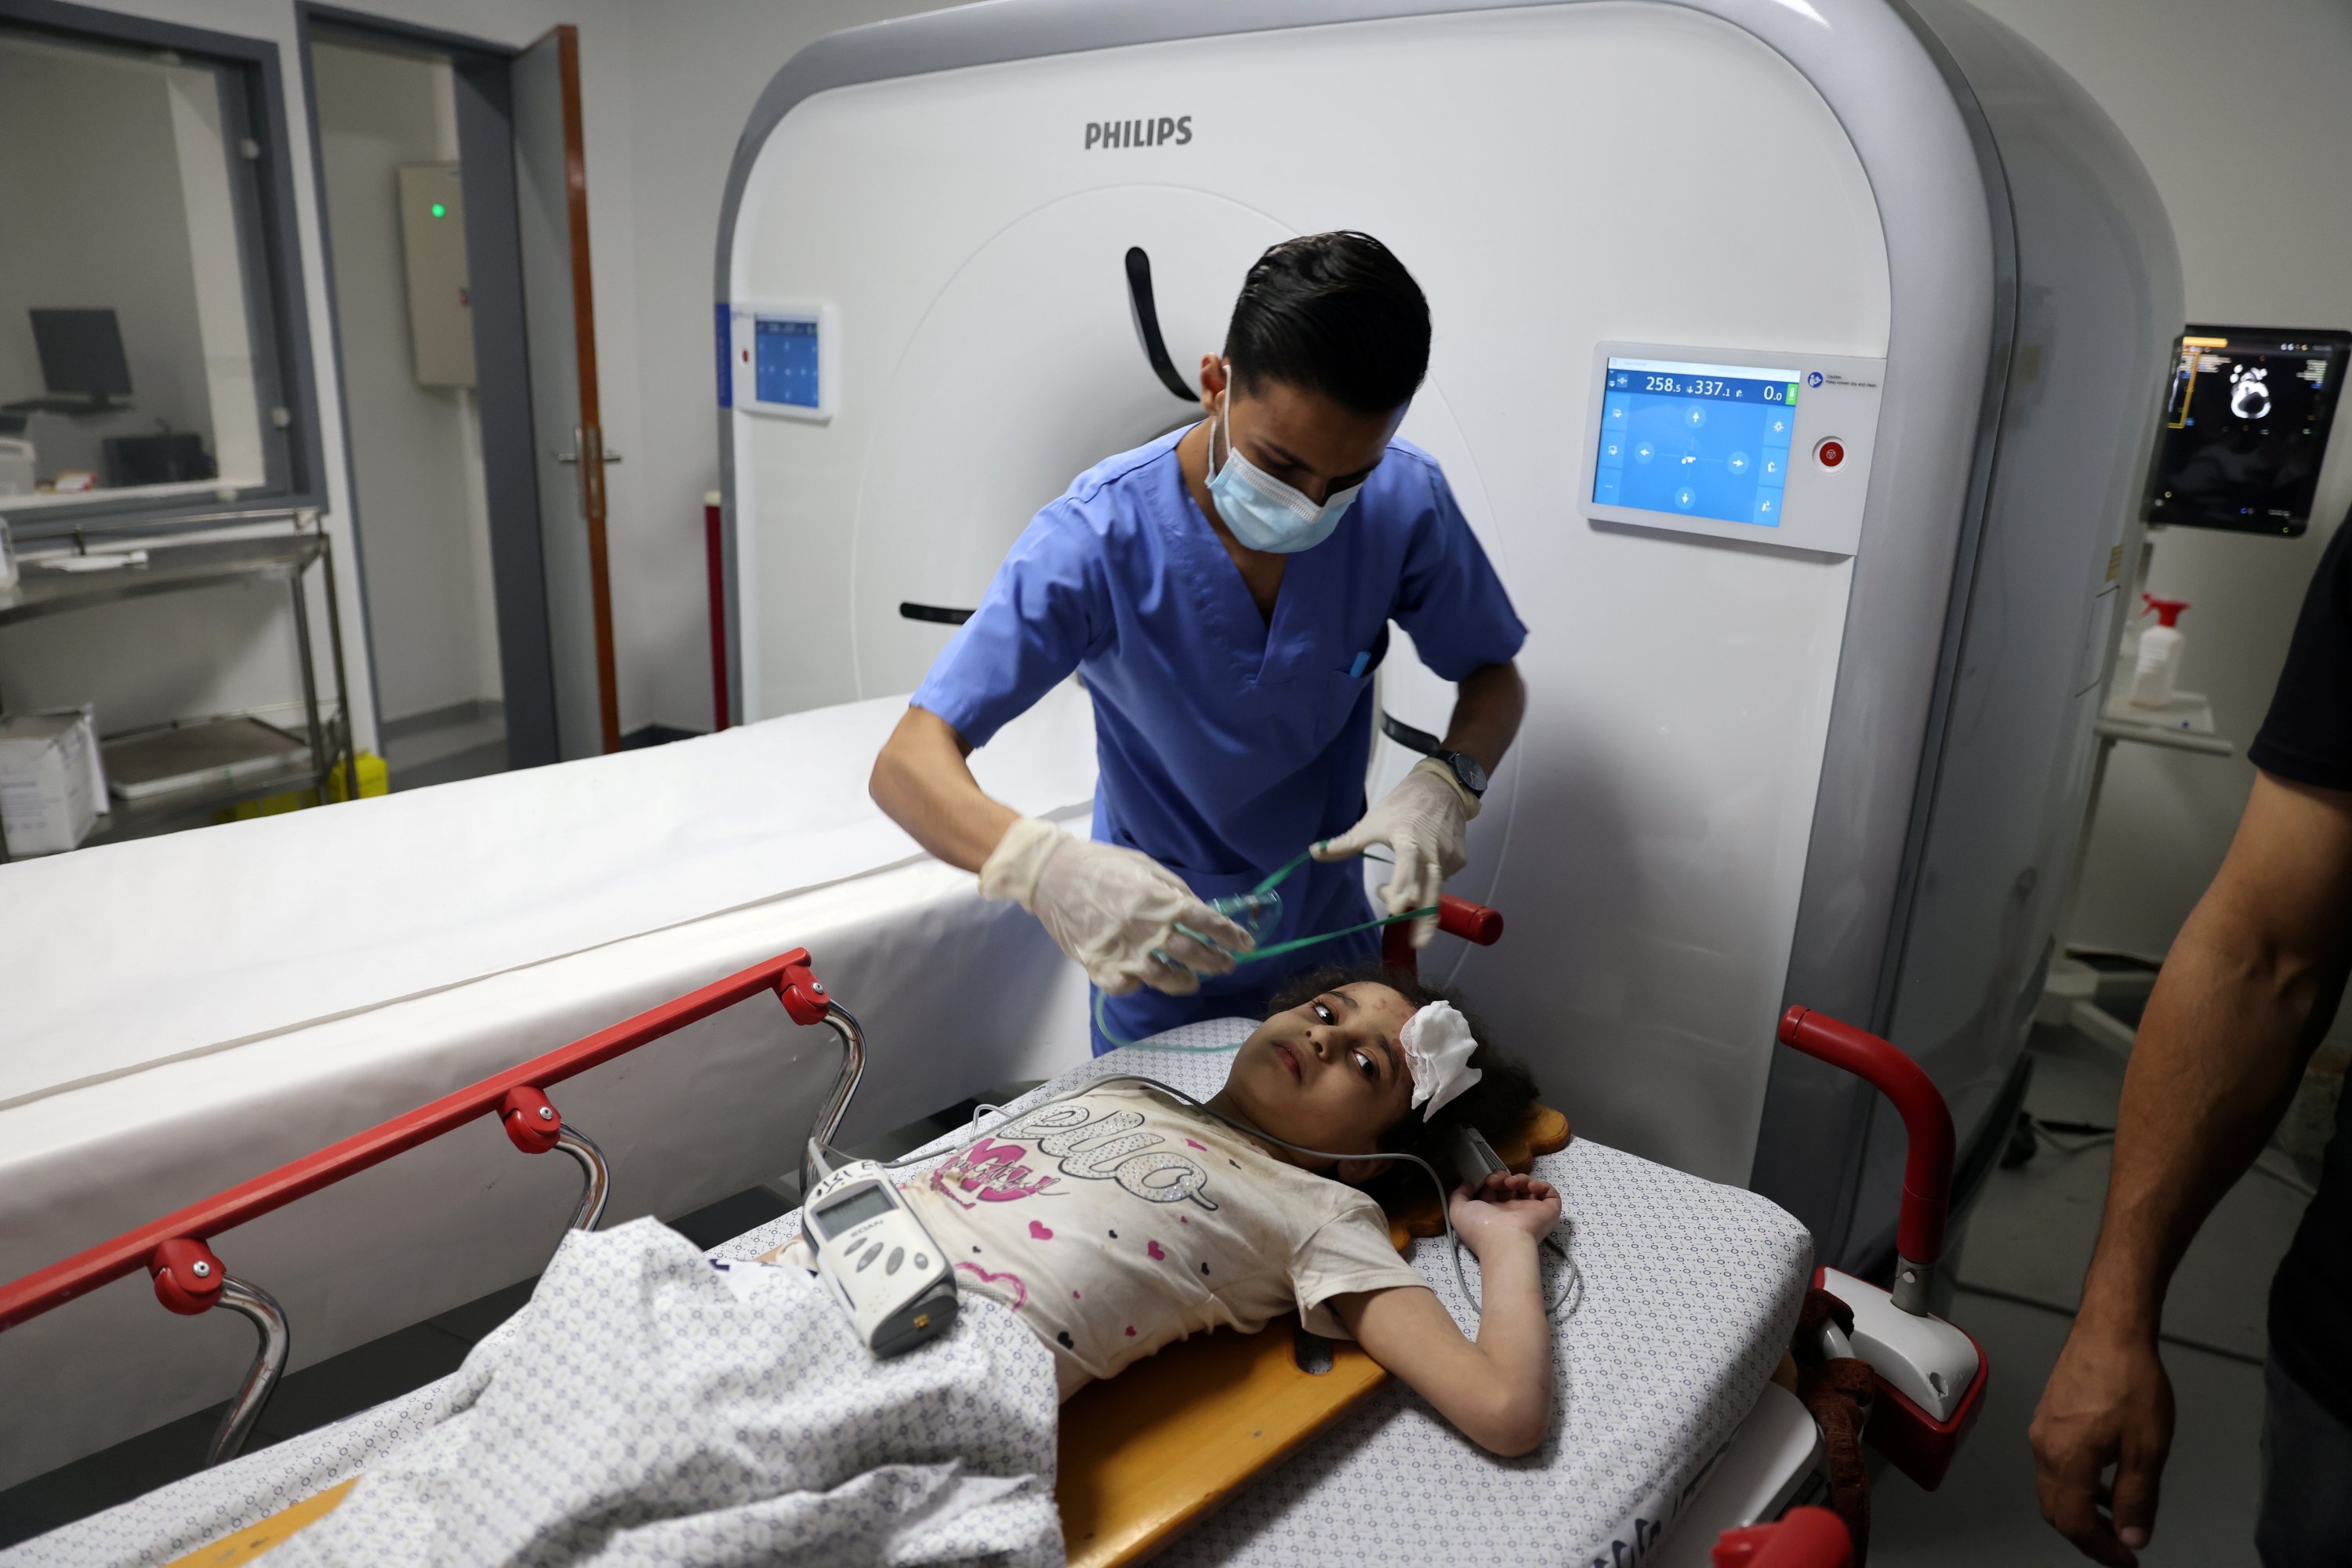 Palestinian girl Suzy Eshkuntana, 6, is treated by a medic at a hospital after being pulled from the rubble of a building amidst Israeli airstrikes, in Gaza City, May 16, 2021. (Reuters Photo)